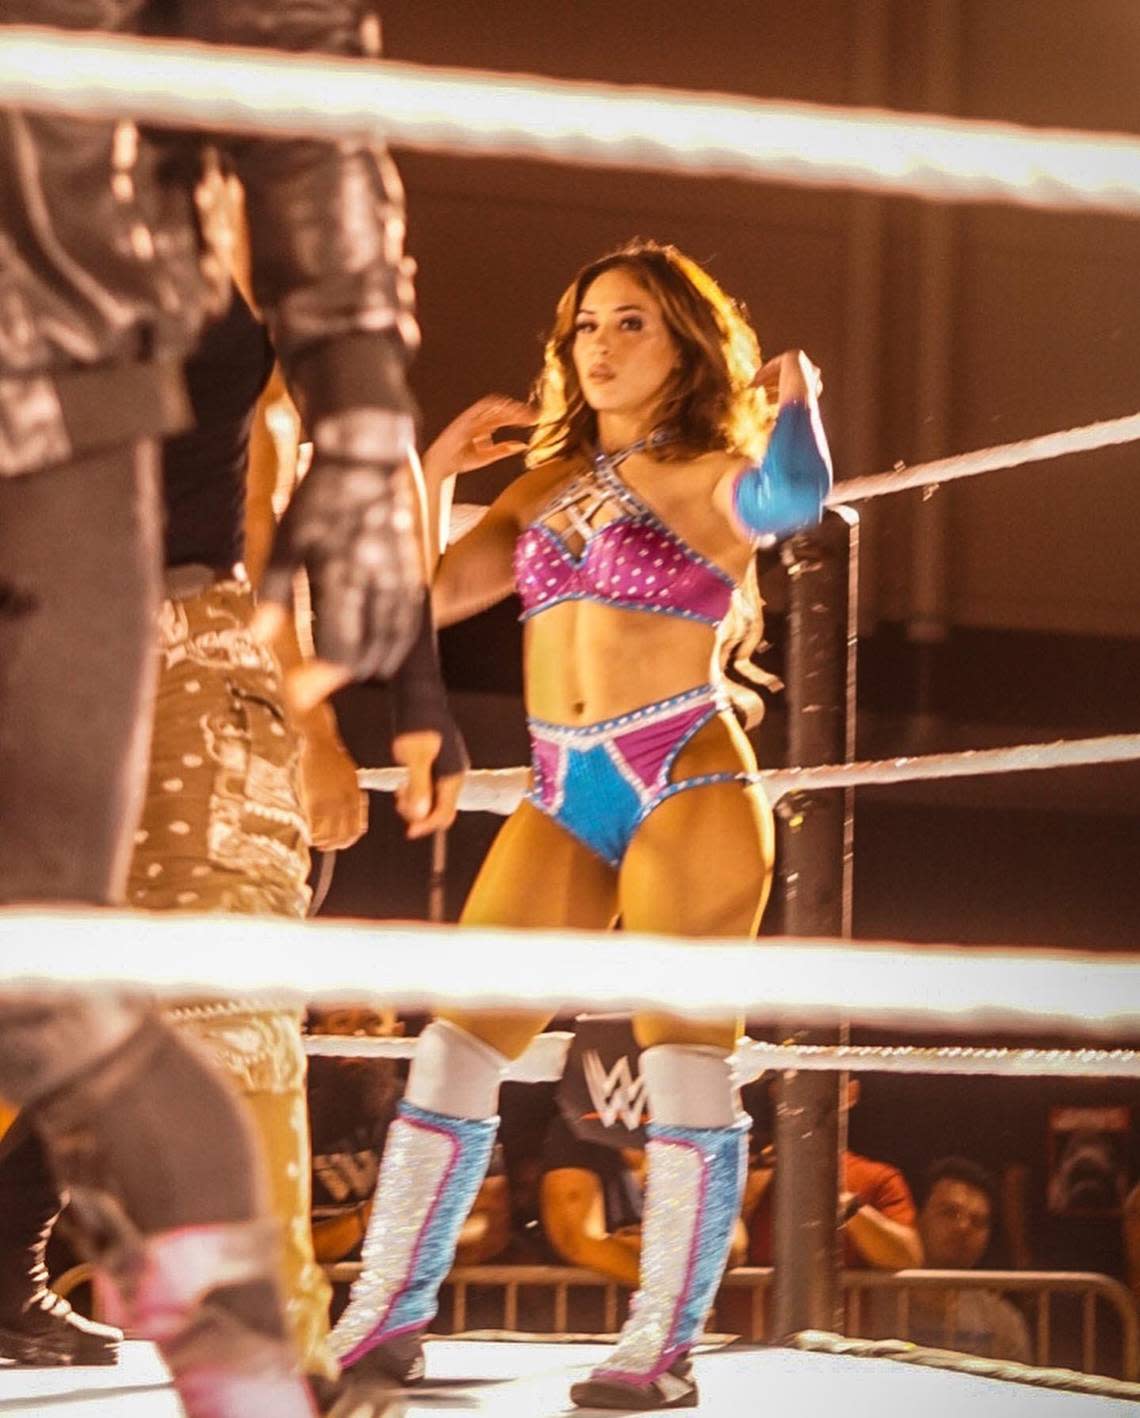 WWE NXT superstar Lola Vice (aka Miami’s Valerie Loureda) made her pro wrestling debut at an NXT live event house show (no TV) on Nov. 12 in Orlando.